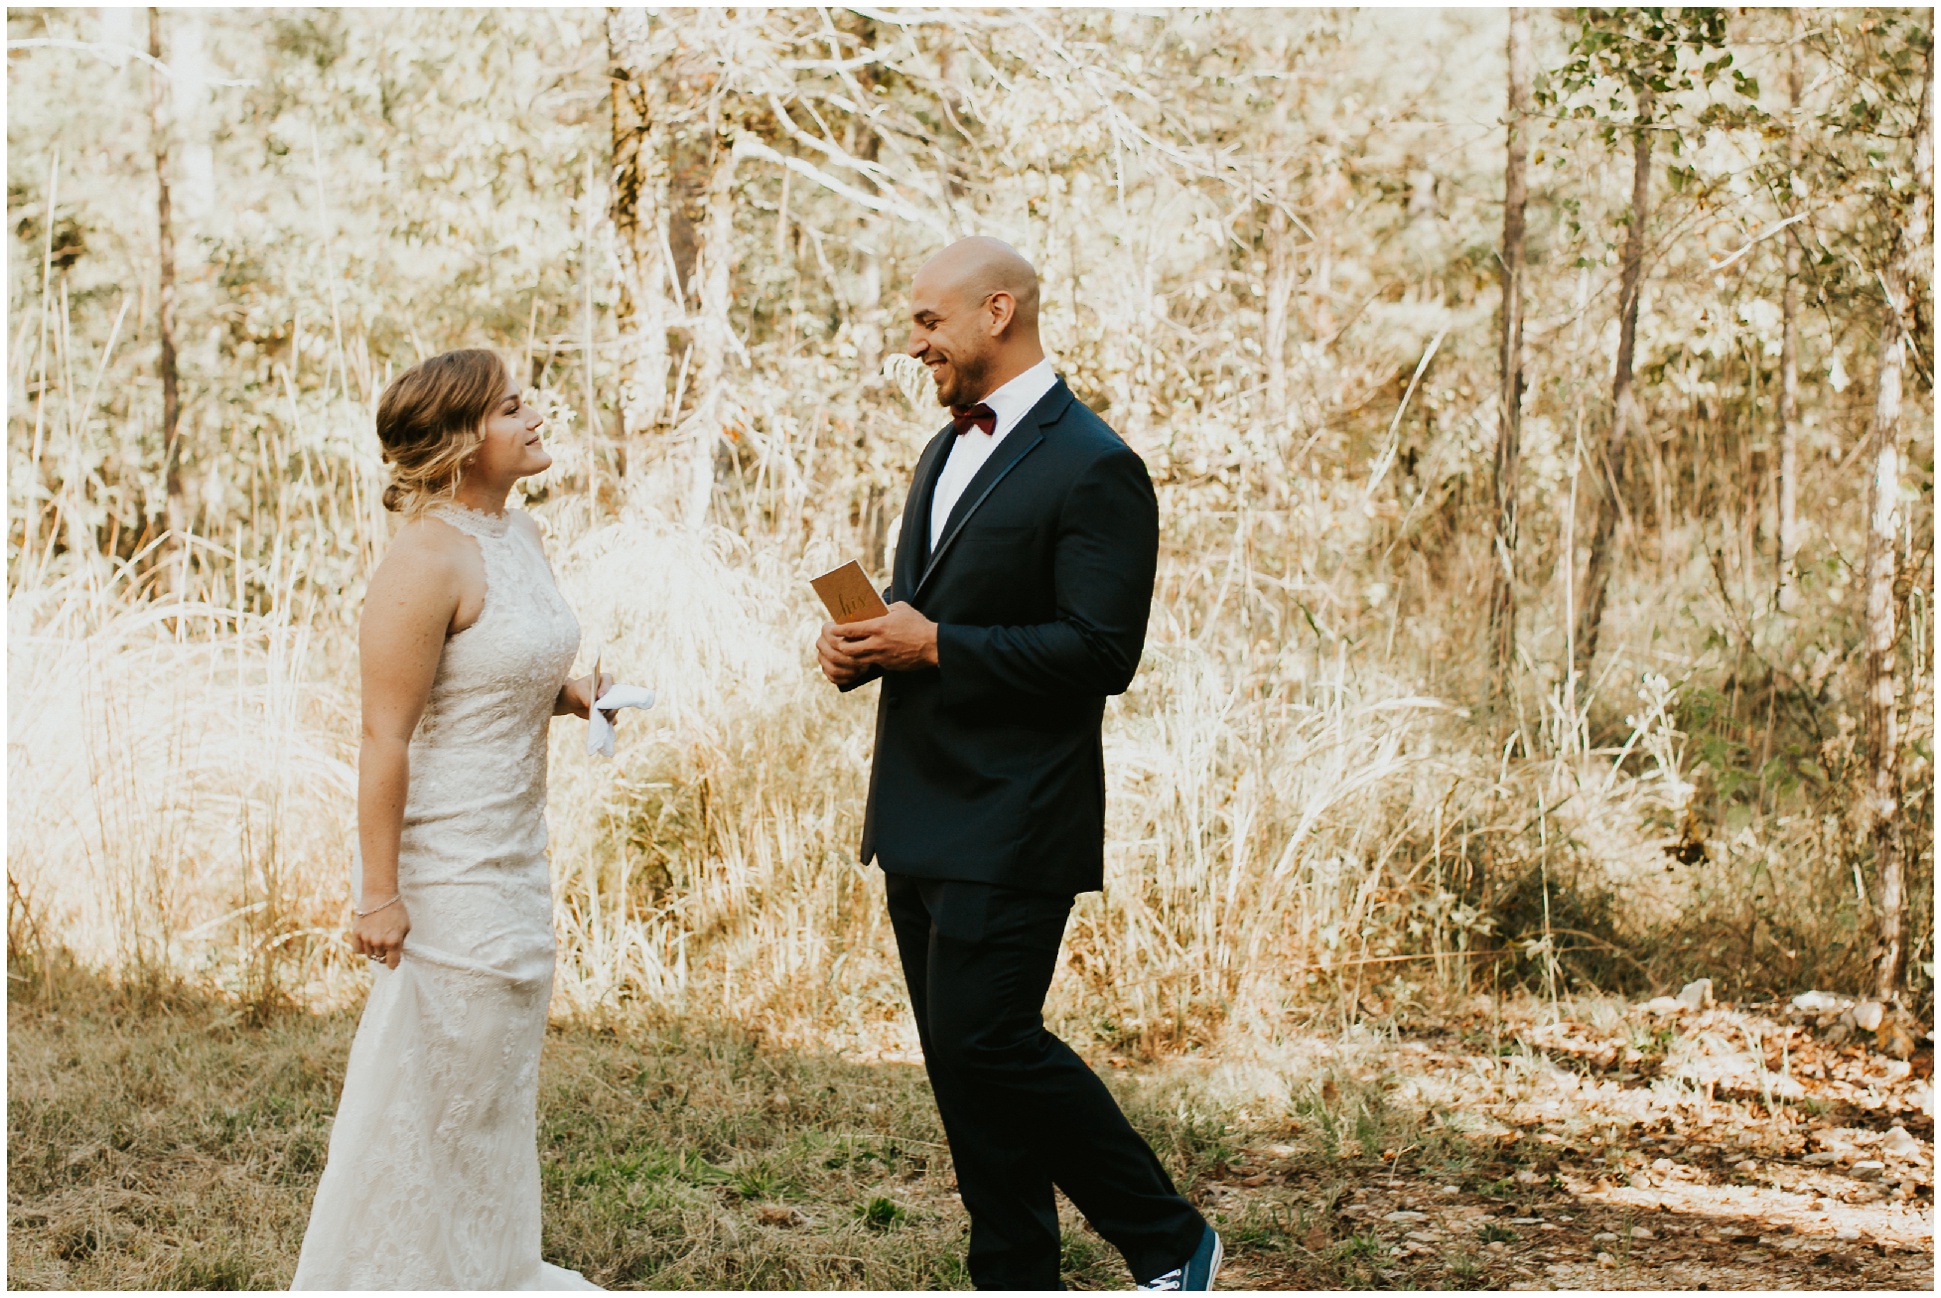 First Look // Beaver's Bend Elopement - Oklahoma Wedding - Taylor Salerno Photography